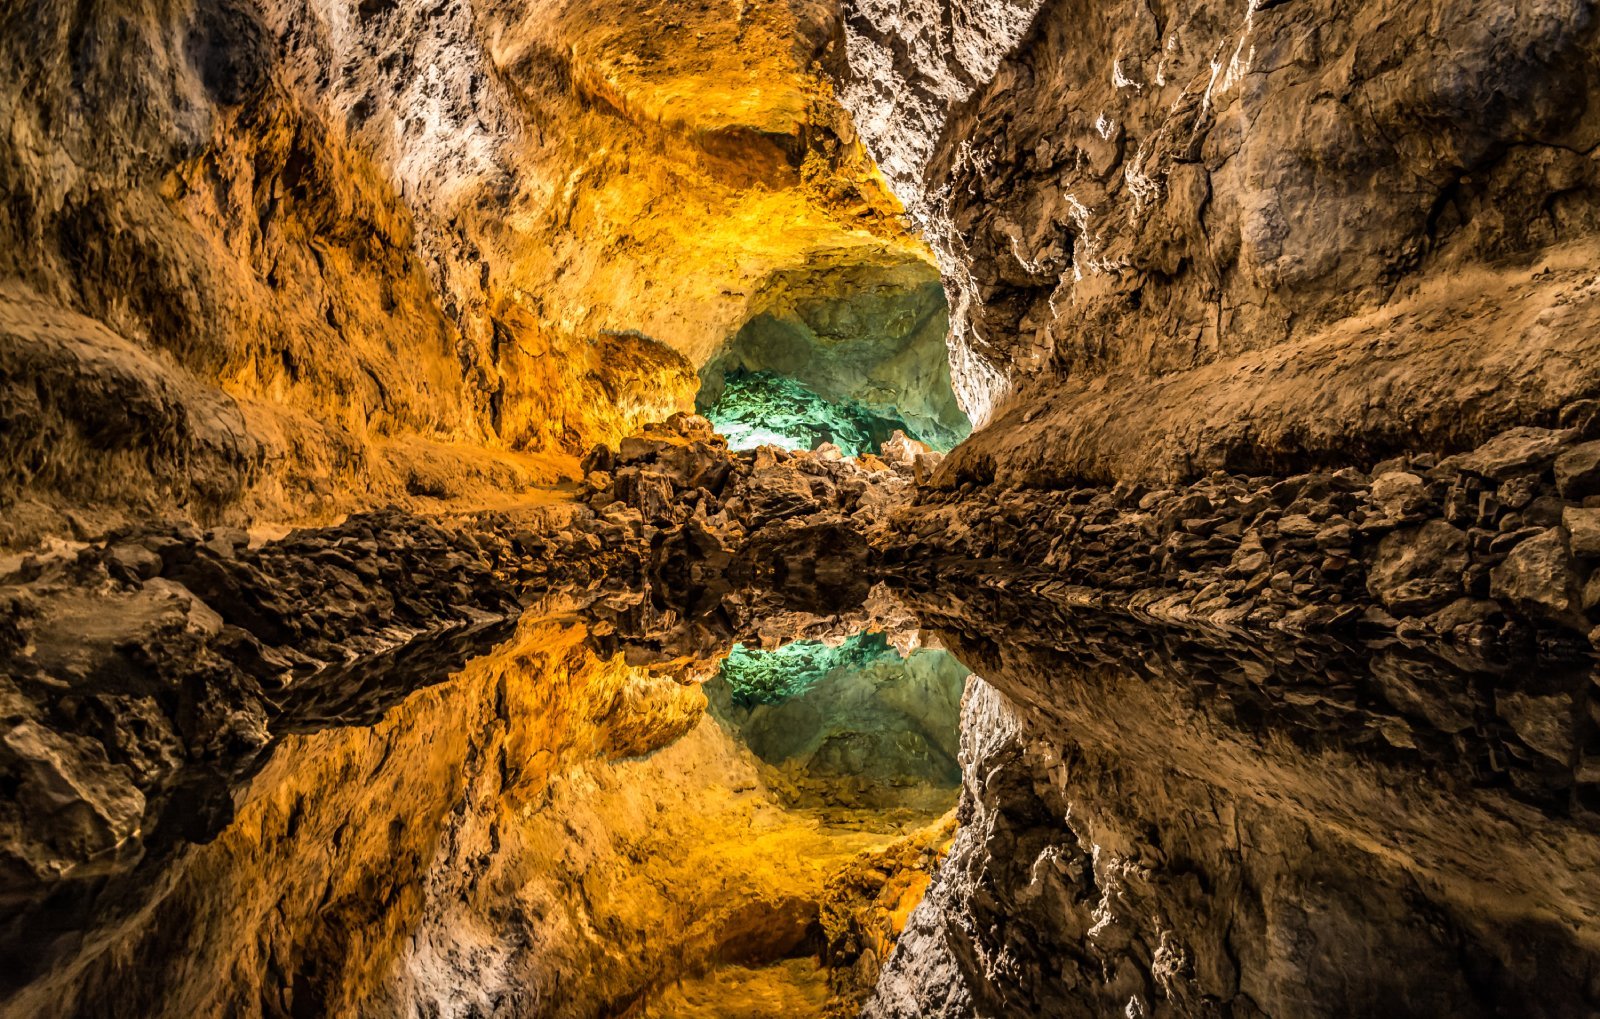 <p class="wp-caption-text">Image Credit: Shutterstock / Tomasz Czajkowski</p>  <p><span>Cueva de los Verdes, part of a monumental lava tube system in the northern part of Lanzarote, Canary Islands, Spain, offers a unique exploration experience distinct from the deep, vertical cave systems often associated with speleology. Formed around 3,000 years ago by volcanic flows from Monte Corona, the cave extends over 6 kilometers above sea level and includes an additional 1.5 kilometers below the sea.</span></p> <p><span>Unlike traditional caves formed by water erosion, Cueva de los Verdes was sculpted by molten lava, creating a network of tunnels and caverns with smooth walls and peculiar shapes. This cave is renowned for its geological significance and cultural impact, having served as a hideout from pirates and invaders in historical times.</span></p> <p><span>Today, it is part of a managed visitor attraction, with guided tours taking visitors through illuminated paths highlighting the cave’s natural beauty and acoustic properties. The cave also hosts a unique concert hall, showcasing its exceptional sound qualities.</span></p> <p><b>Insider’s Tip: </b><span>While the cave is accessible to the general public, joining a guided tour is mandatory. These tours offer valuable insights into the cave’s geological formation, history, and ecological significance. Wear comfortable walking shoes and bring a light jacket, as temperatures inside the cave can be cooler than the surface.</span></p> <p><b>When to Travel: </b><span>Cueva de los Verdes can be visited year-round, thanks to Lanzarote’s mild climate. However, visiting during the off-peak season (spring and autumn) can offer a more tranquil experience, avoiding the larger crowds of summer.</span></p> <p><b>How to Get There: </b><span>Lanzarote is well-connected by air with flights from mainland Spain and other European cities. Once on the island, Cueva de los Verdes is easily accessible by car or bus from Arrecife, the island’s capital. The cave is located near the town of Haría in the north, with clear signage directing visitors to the site.</span></p>